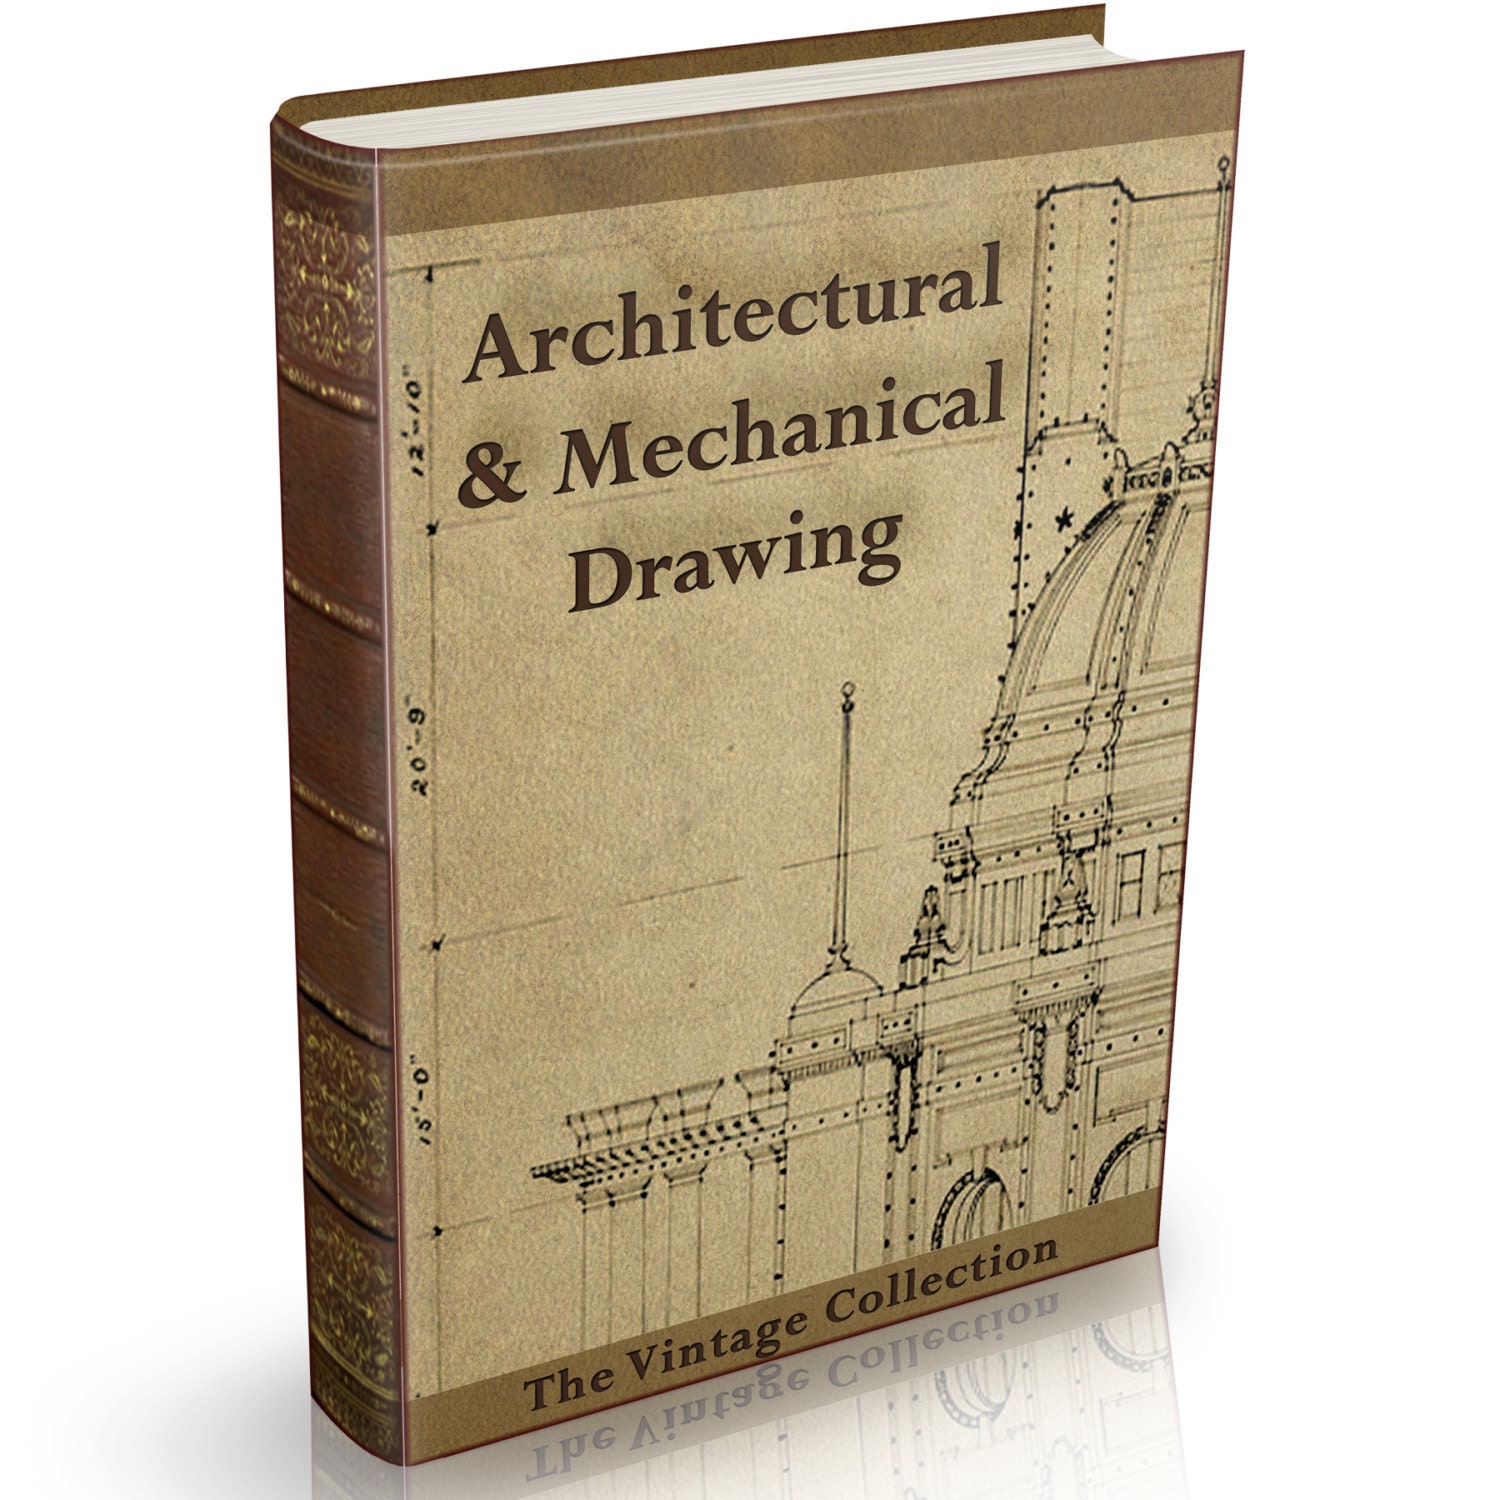  Architectural Mechanical Drawing 137 Old Books on DVD